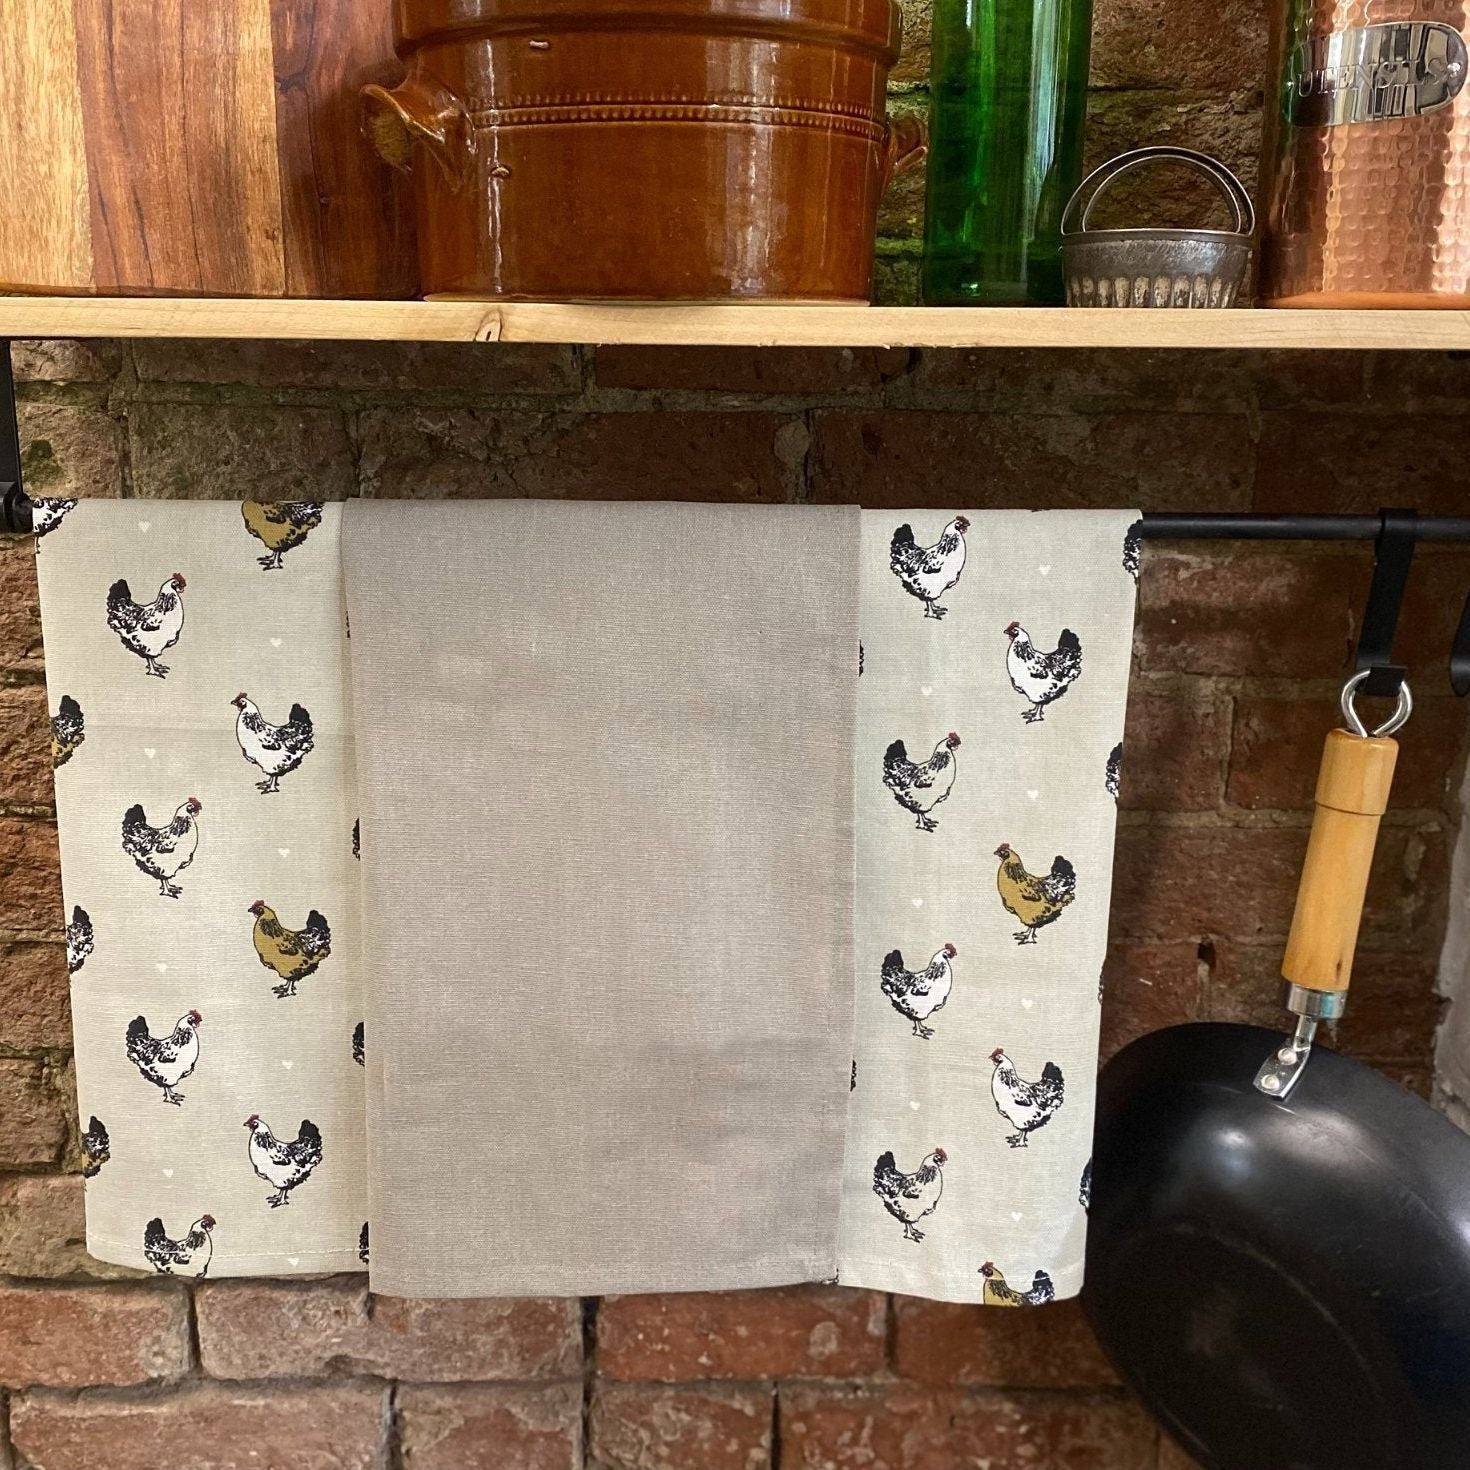 Pack of Three Tea Towels With A Chicken Print Design - Ashton and Finch